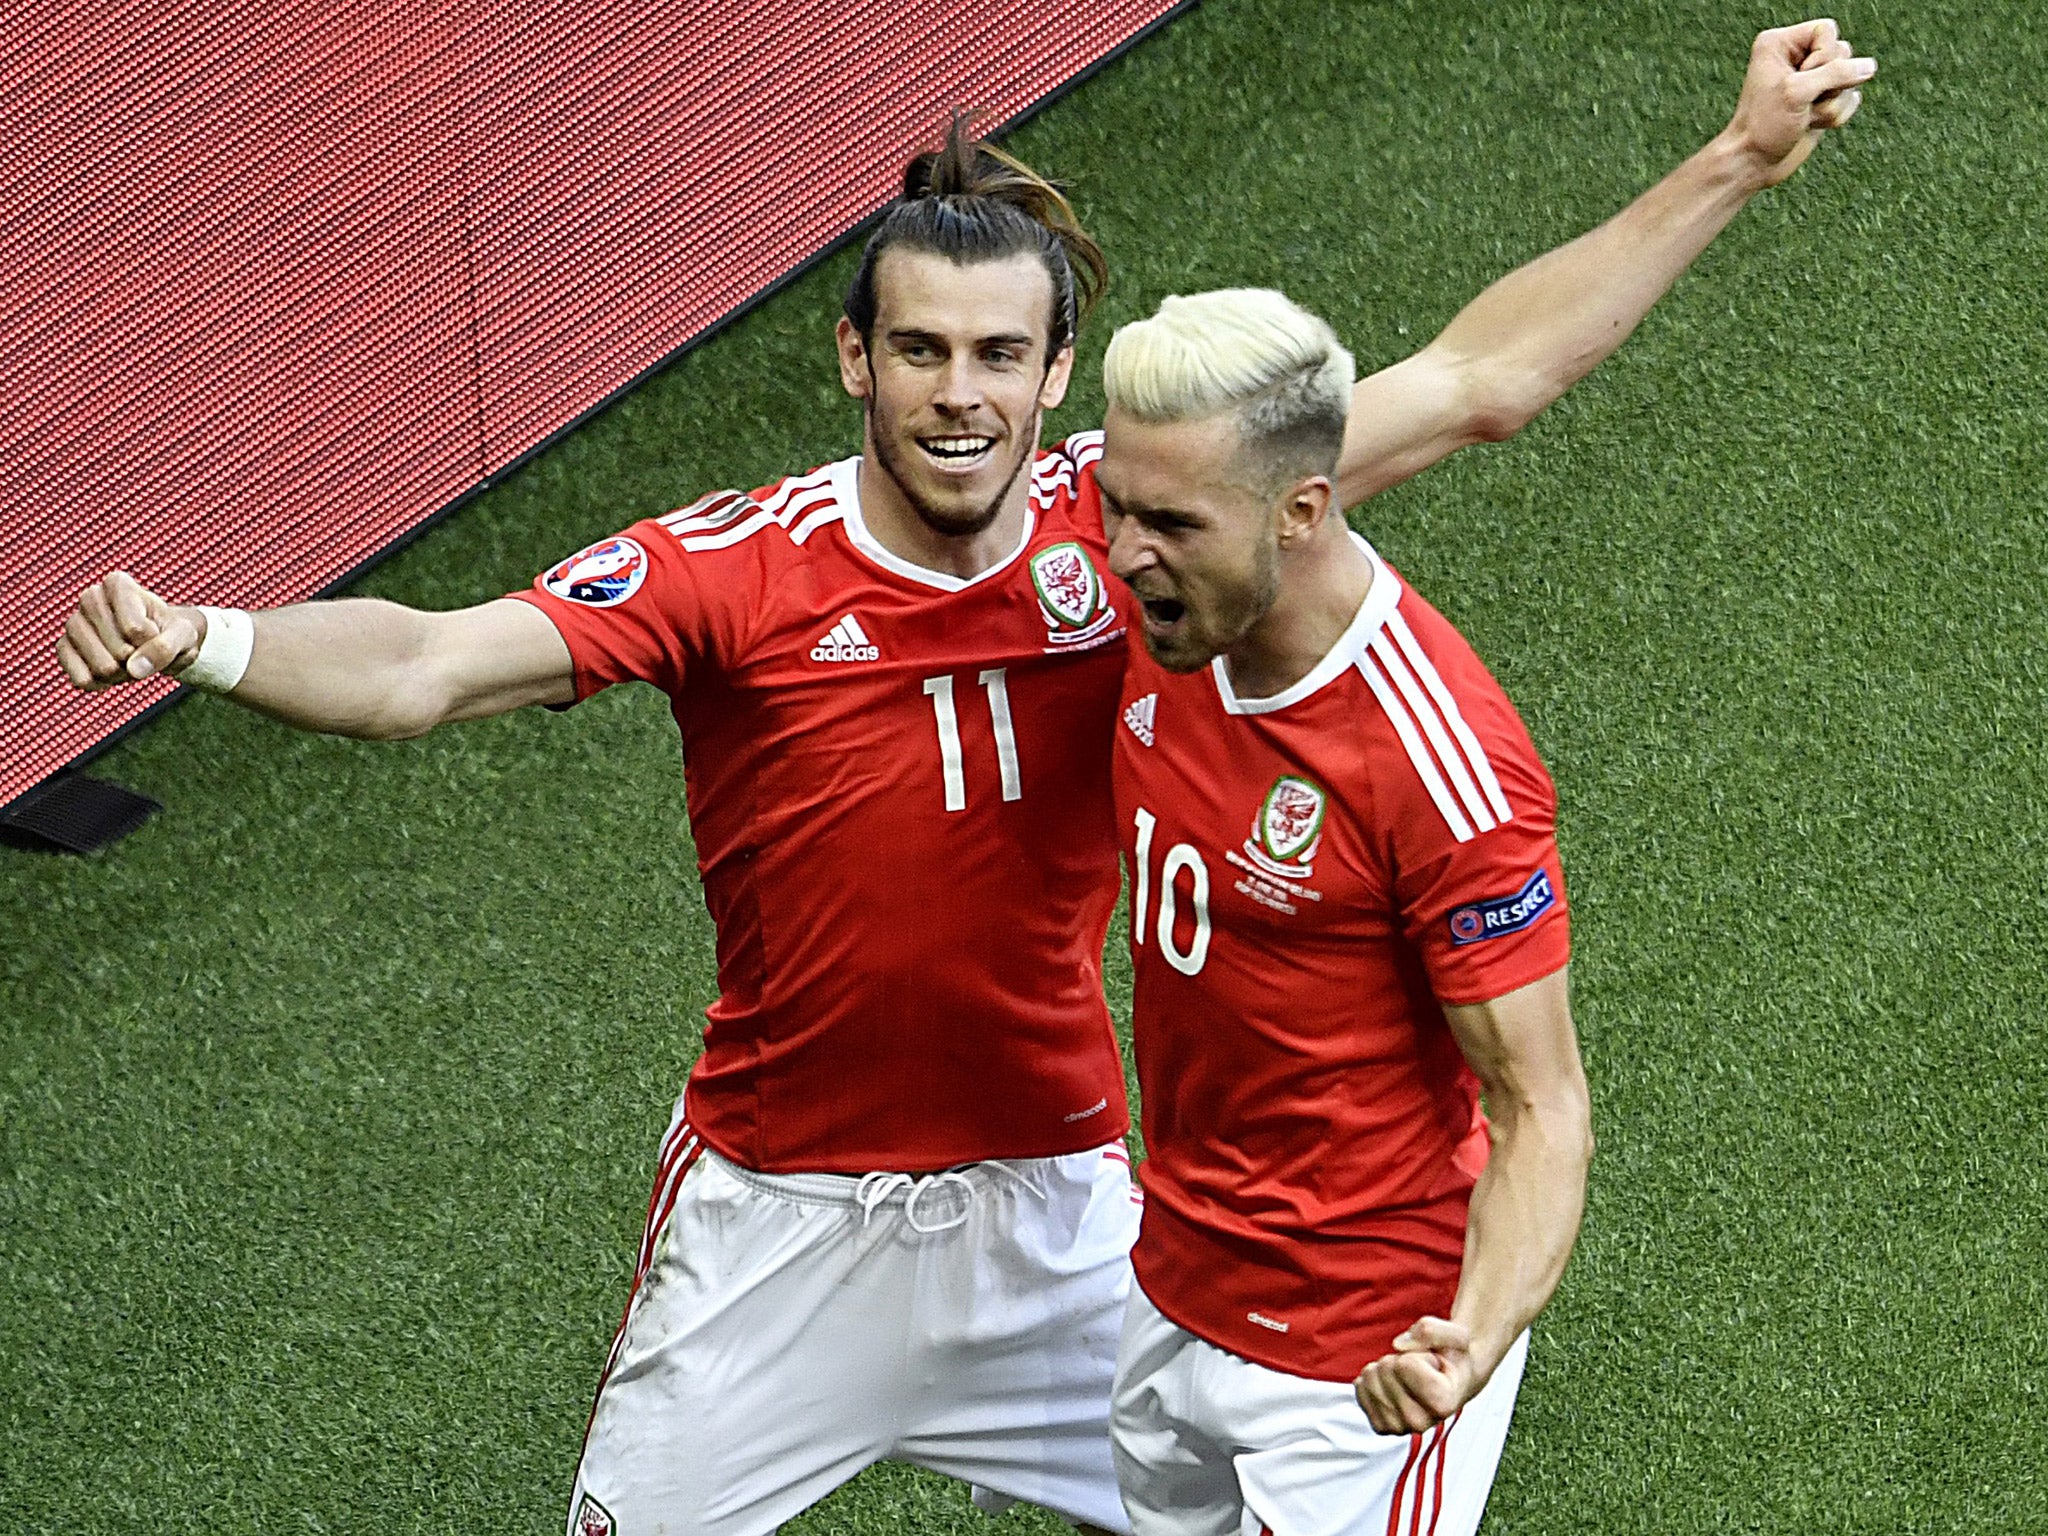 Gareth Bale celebrates with Aaron Ramsey after Gareth McAuley's own goal